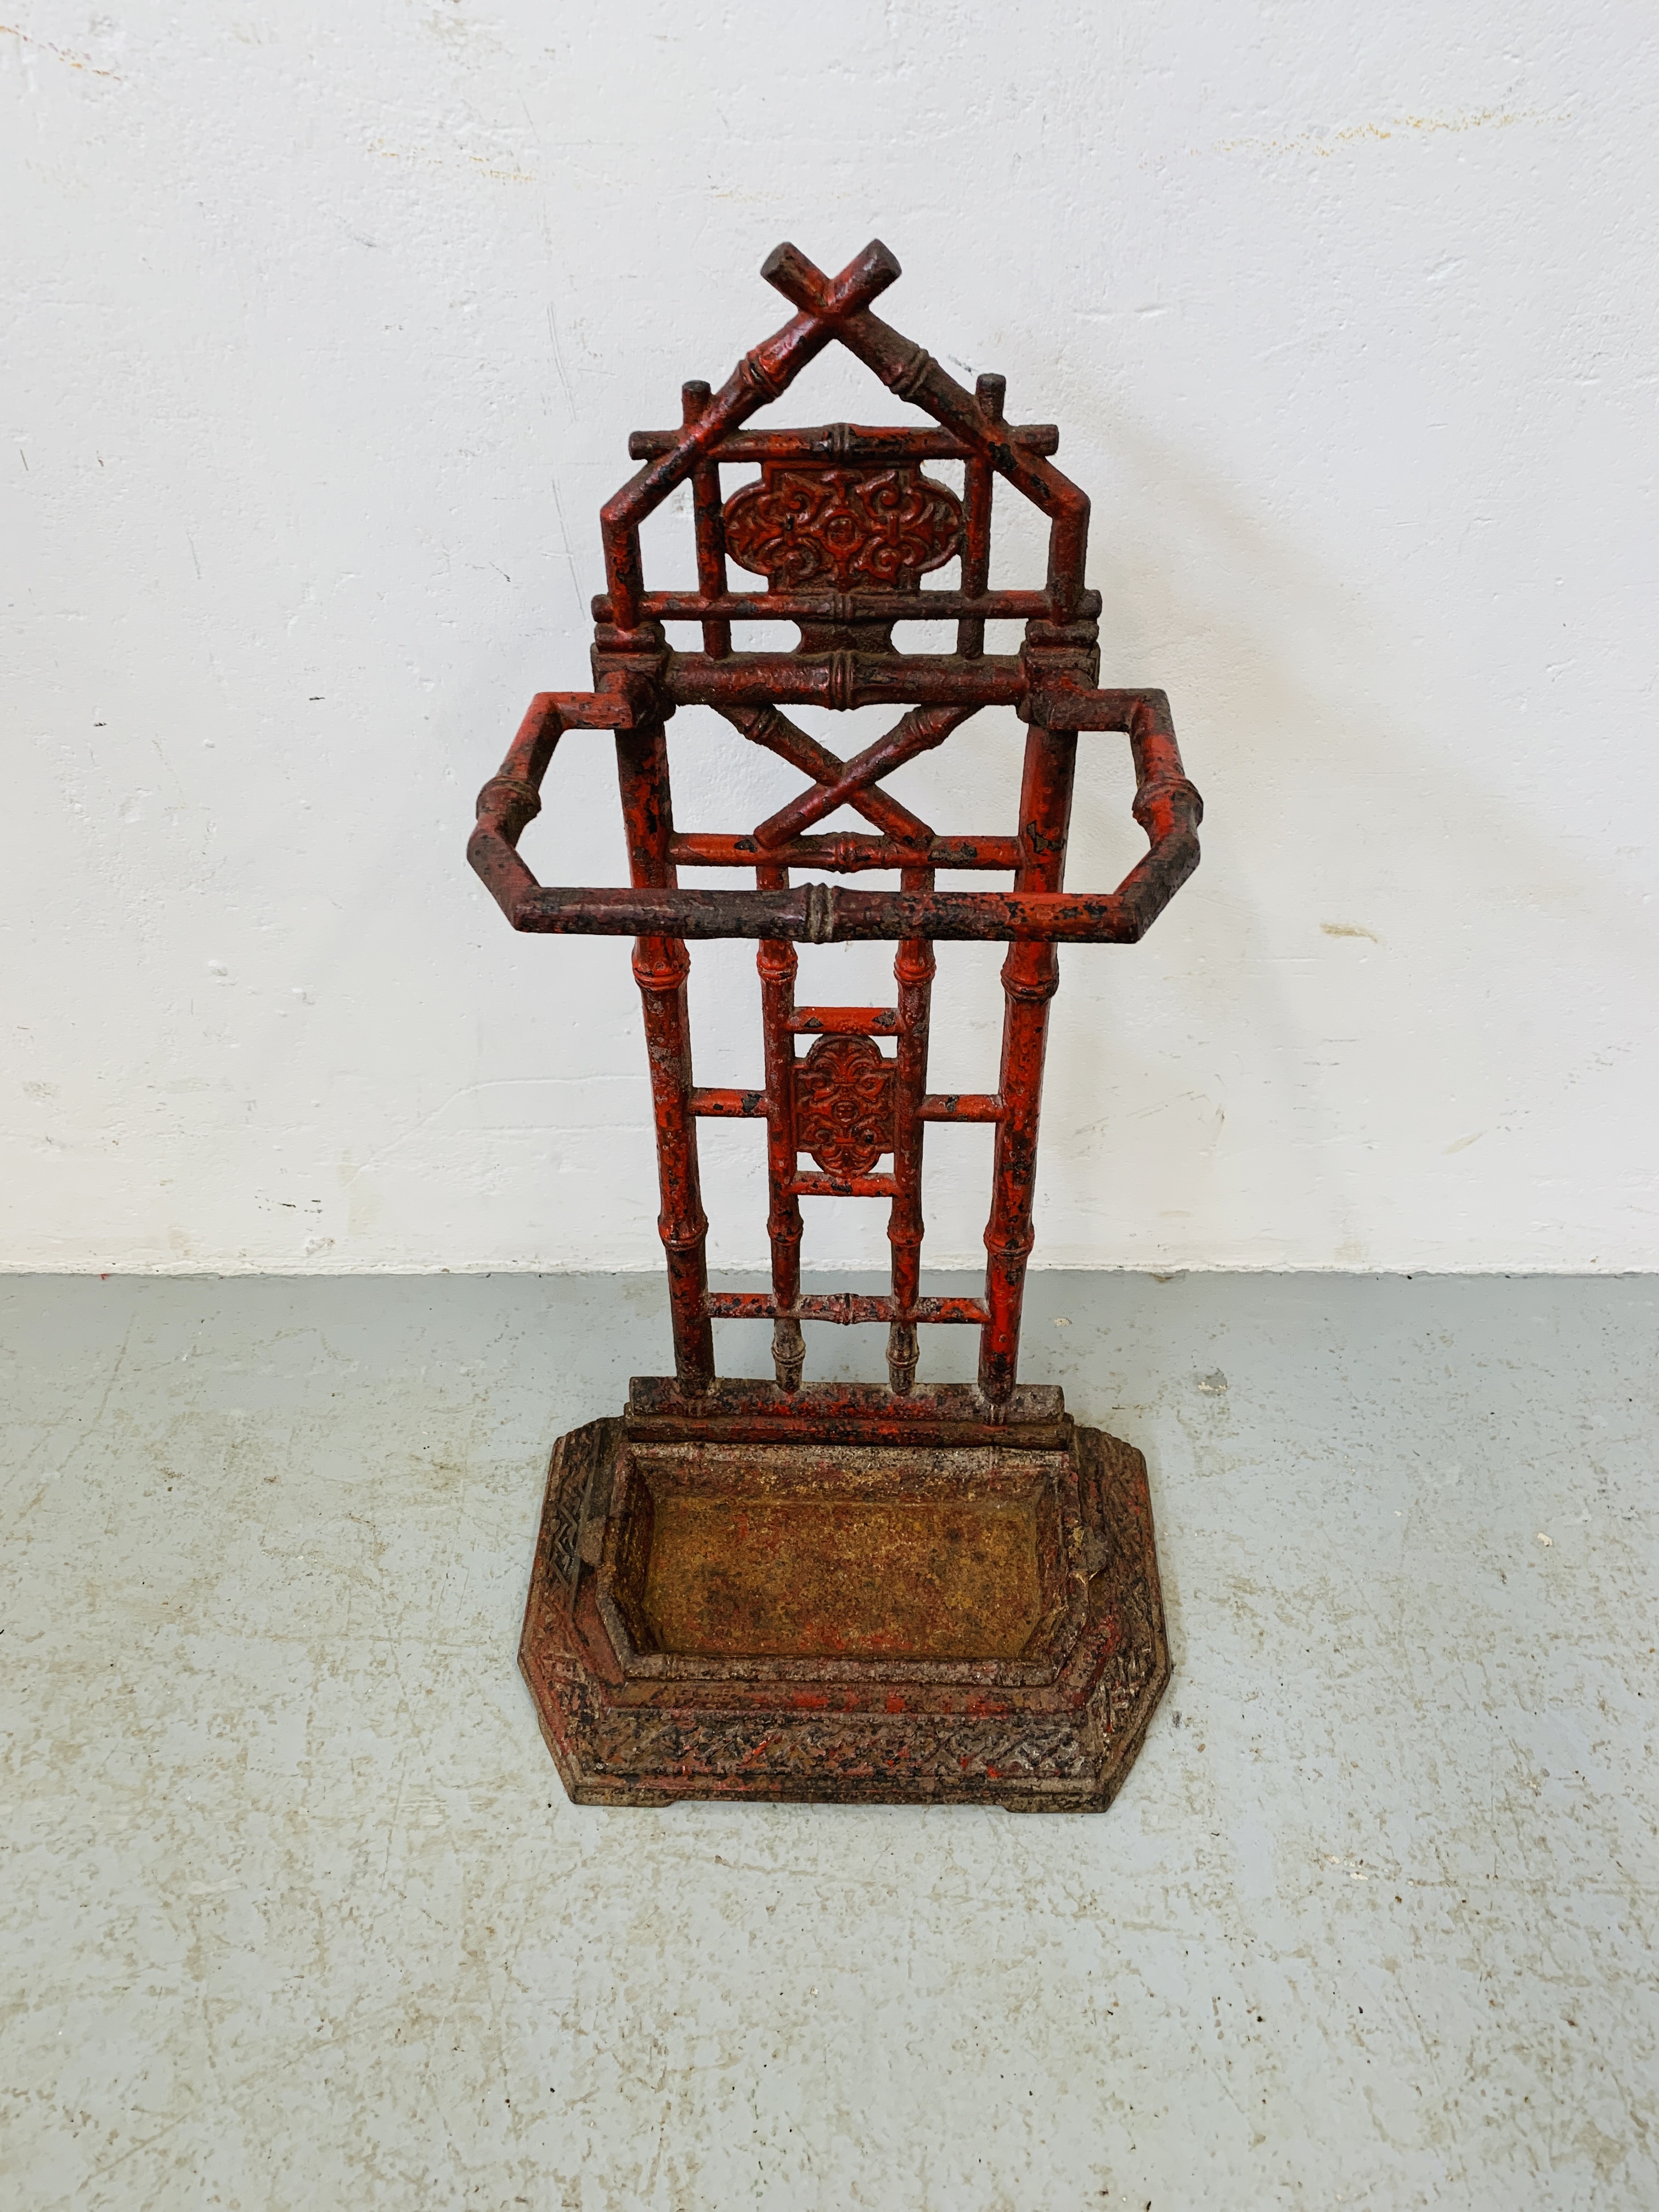 ANTIQUE CAST IRON UMBRELLA STAND - BAMBOO DESIGN (FLAKED RED PAINT) H 70CM. - Image 2 of 6